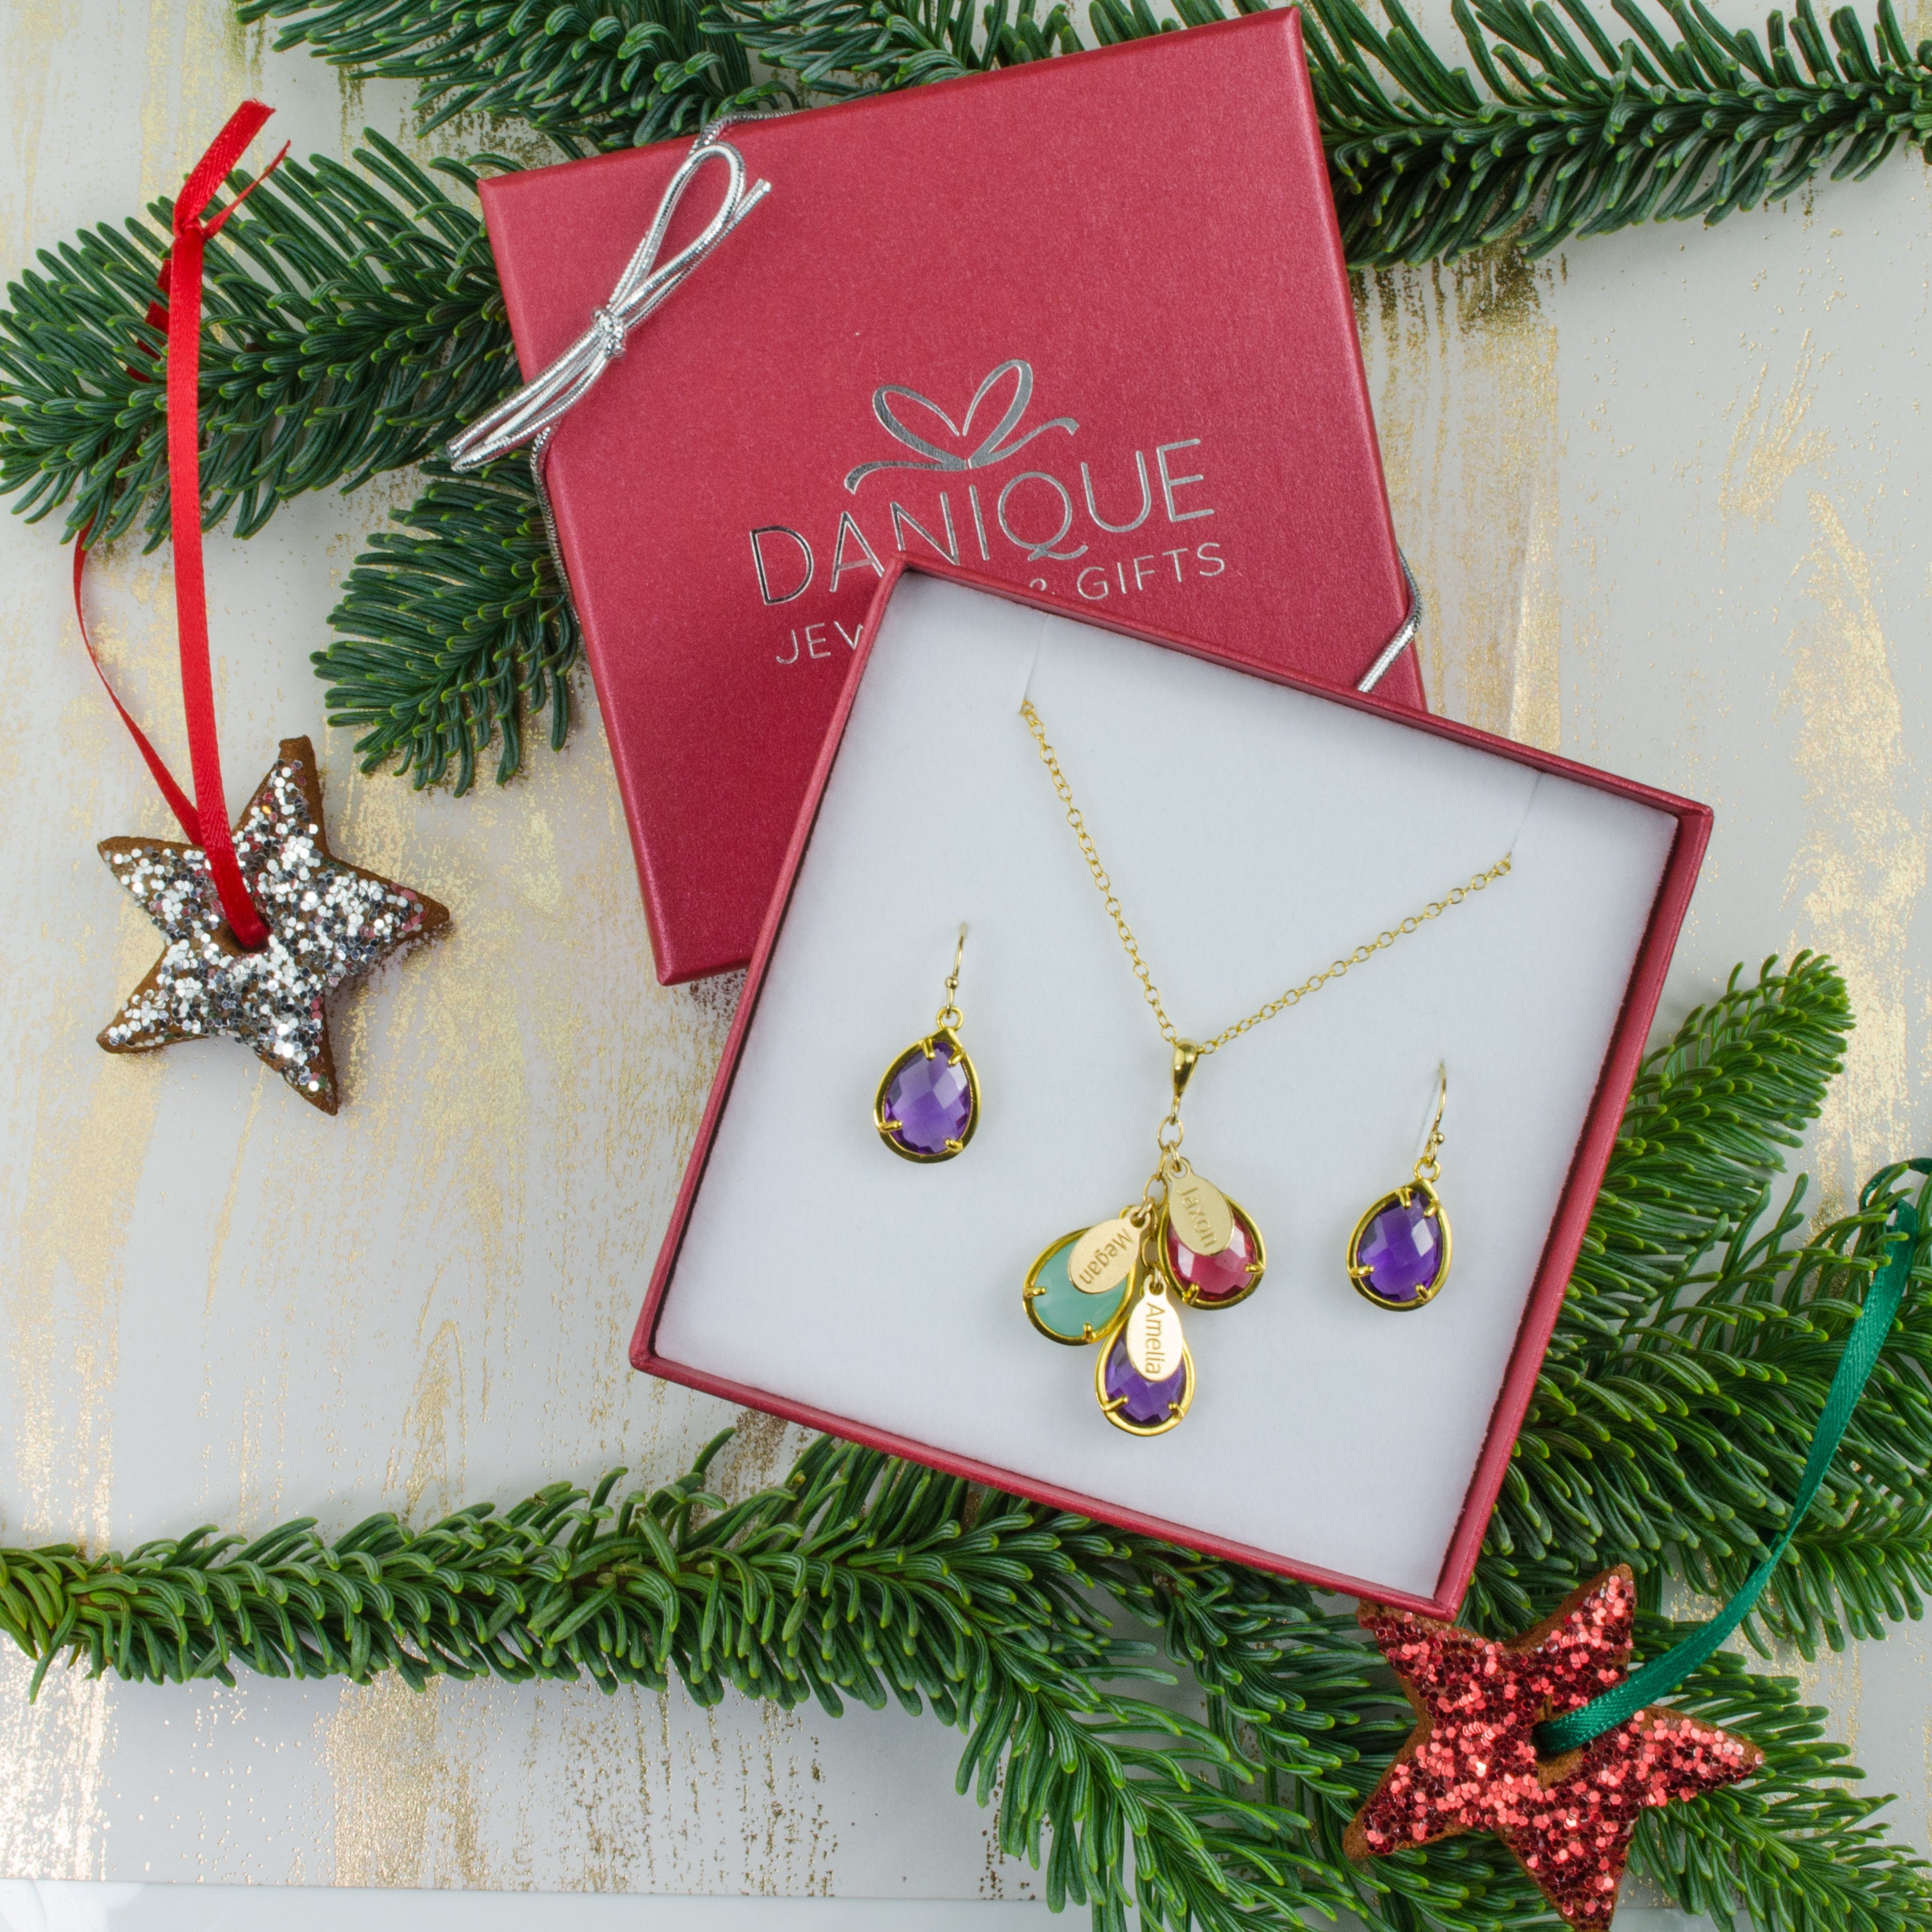 Christmas Gift for Mom: Present, Necklace, Jewelry, Xmas Gift